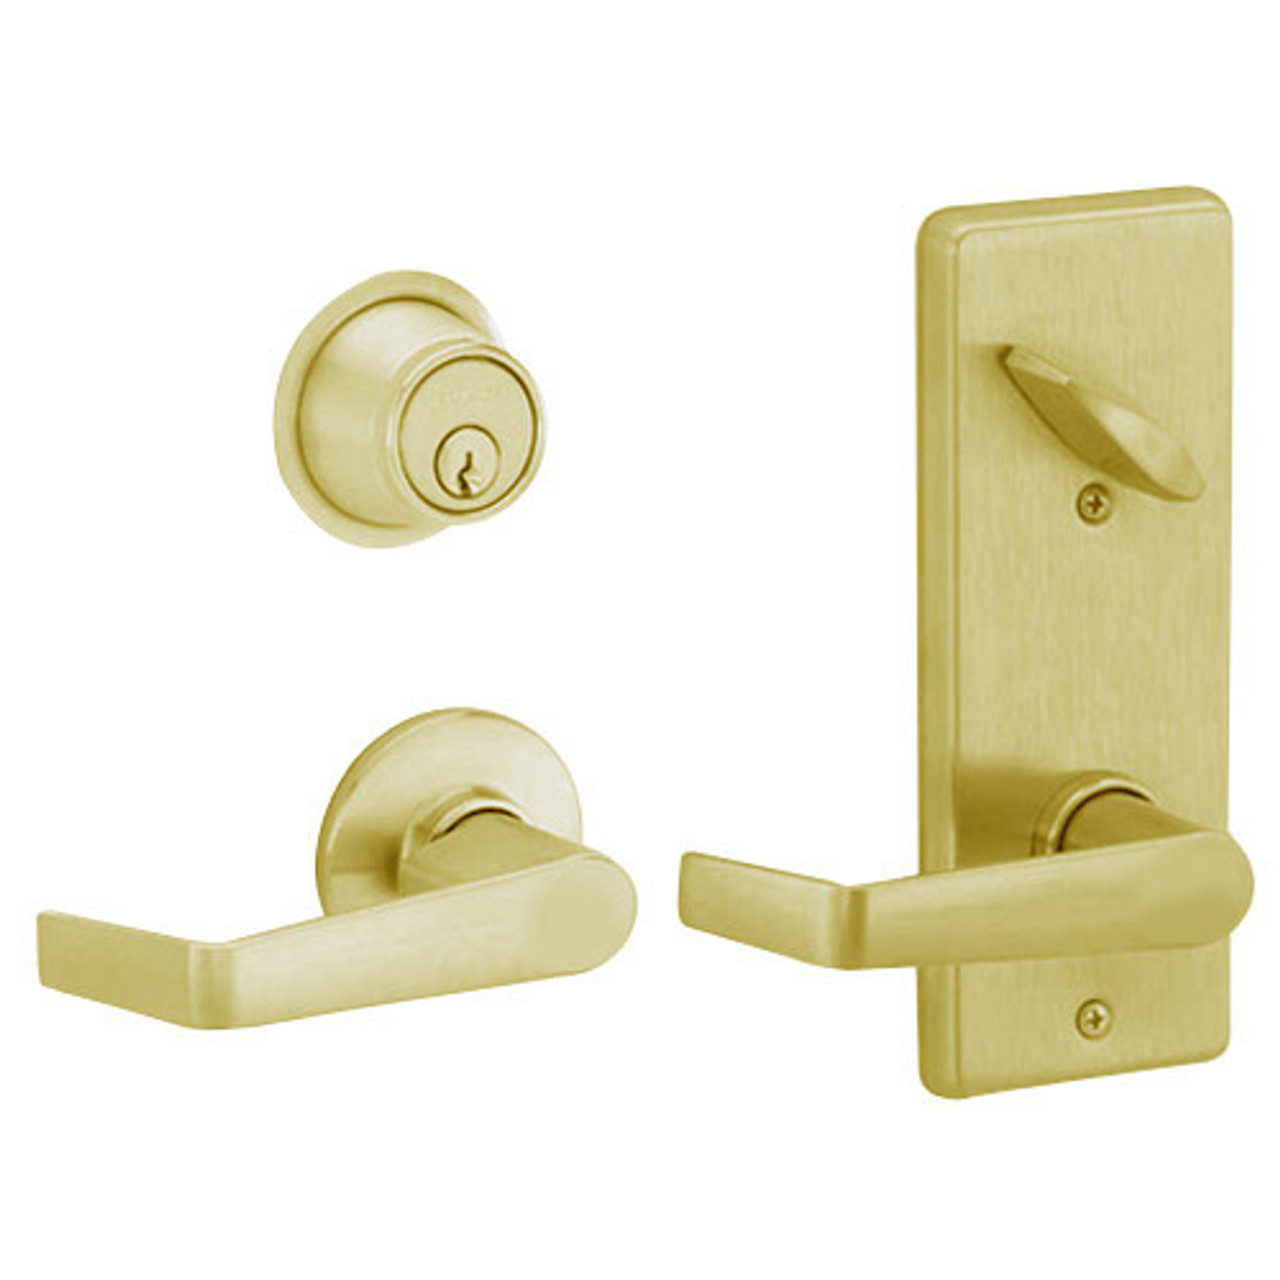 S210PD-SAT-606 Schlage S210PD Saturn Style Interconnected Lock in Satin Brass